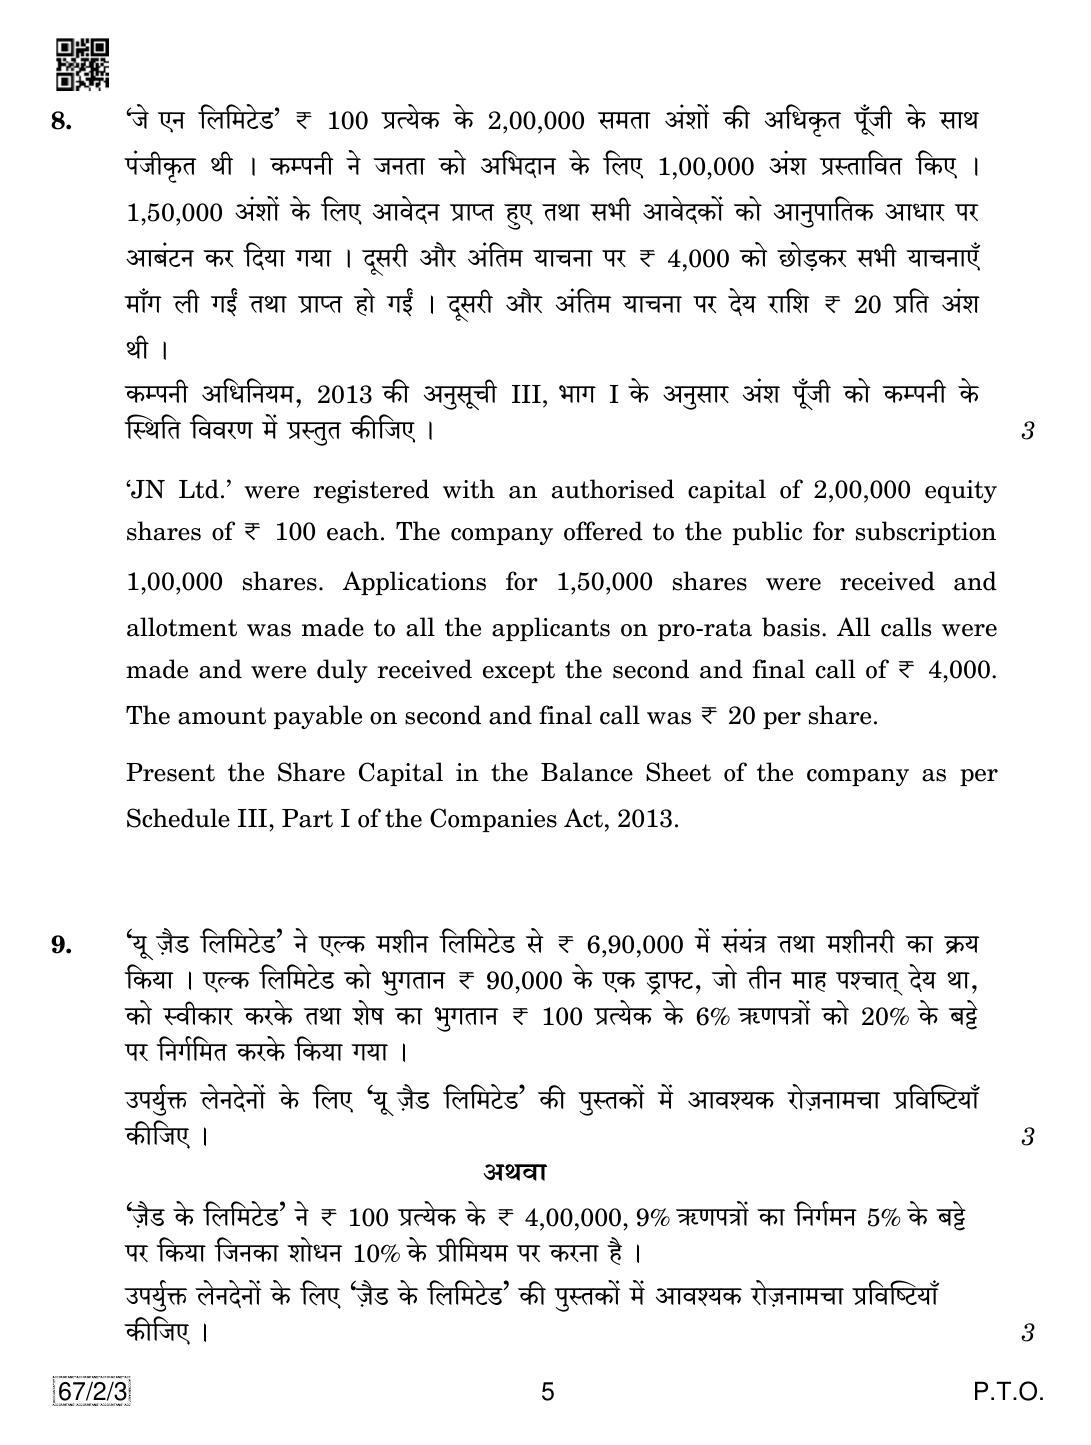 CBSE Class 12 67-2-3 Accountancy 2019 Question Paper - Page 5